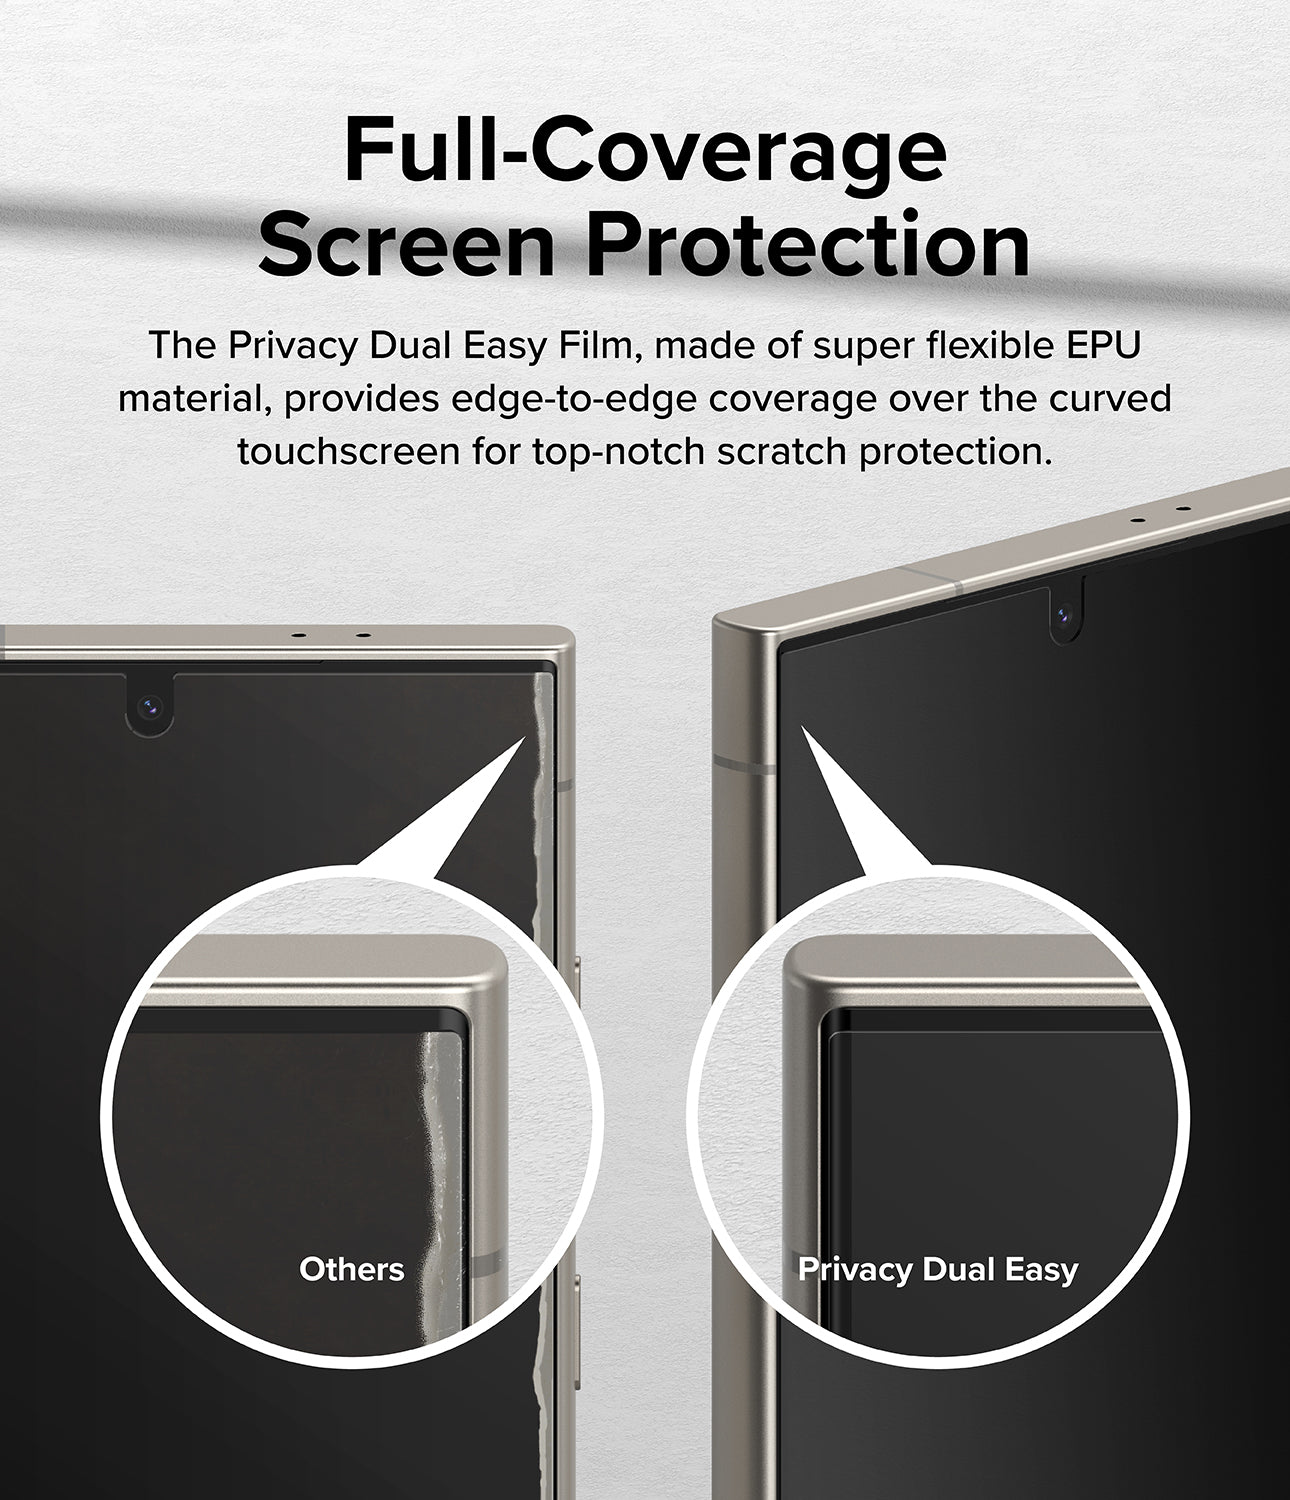 Galaxy S24 Ultra Screen Protector | Privacy Dual Easy Film - Full Coverage Screen Protection. The privacy Dual Easy Film. made a super flexible EPU material. provides edge-to-edge coverage over the curved touchscreen for top-notch scratch protection